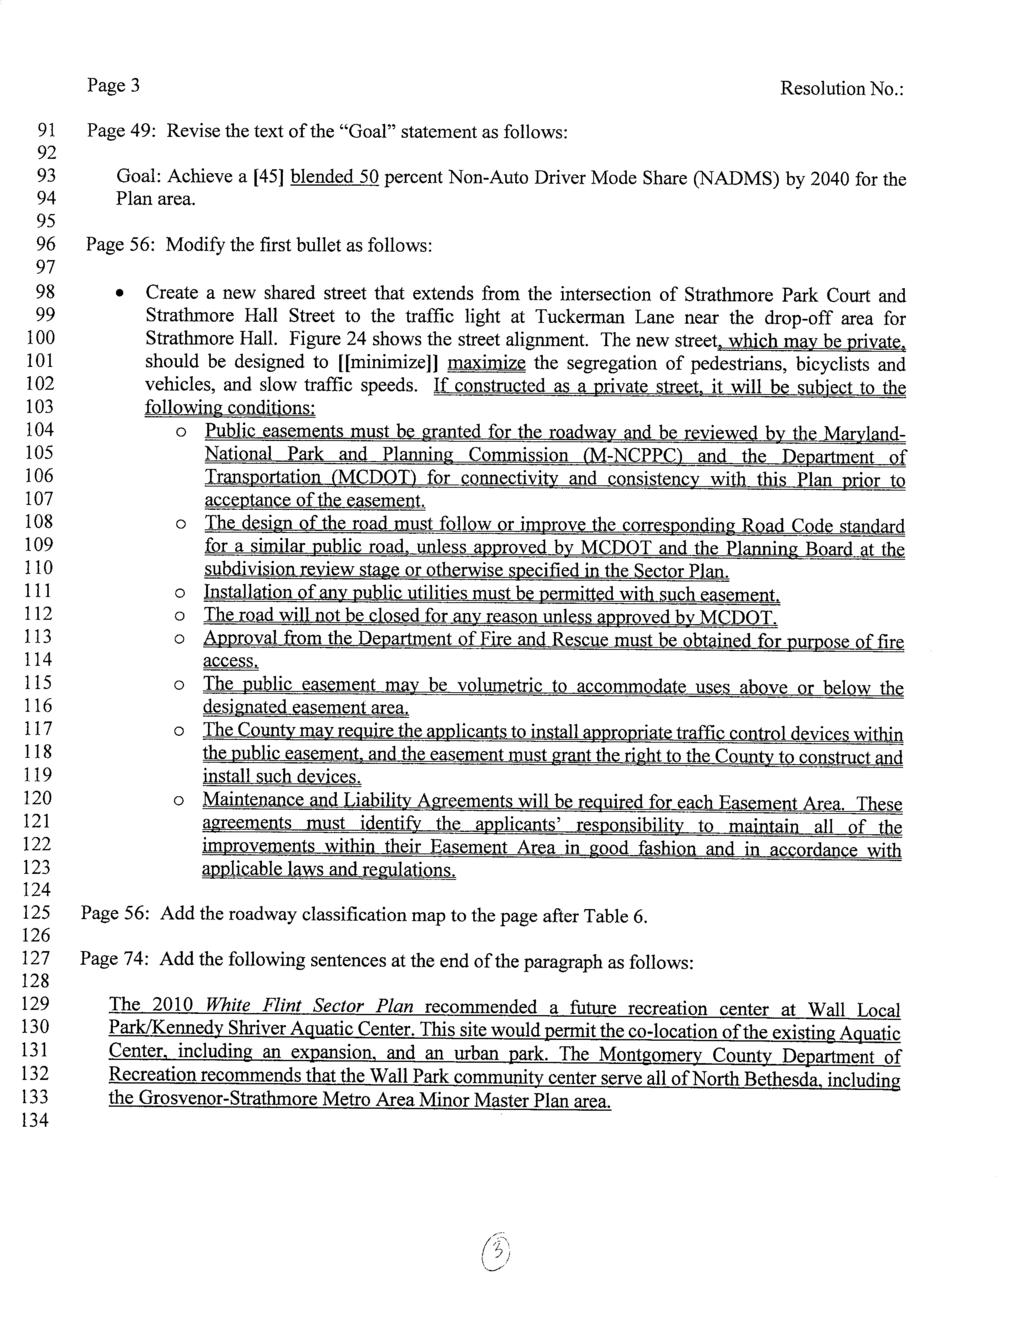 Page 3 Resolution No.: 91 Page 49: Revise the text of the "Goal" statement as follows: 92 93 Goal: Achieve a [45] blended 50 percent Non-Auto Driver Mode Share (NADMS) by 2040 for the 94 Plan area.